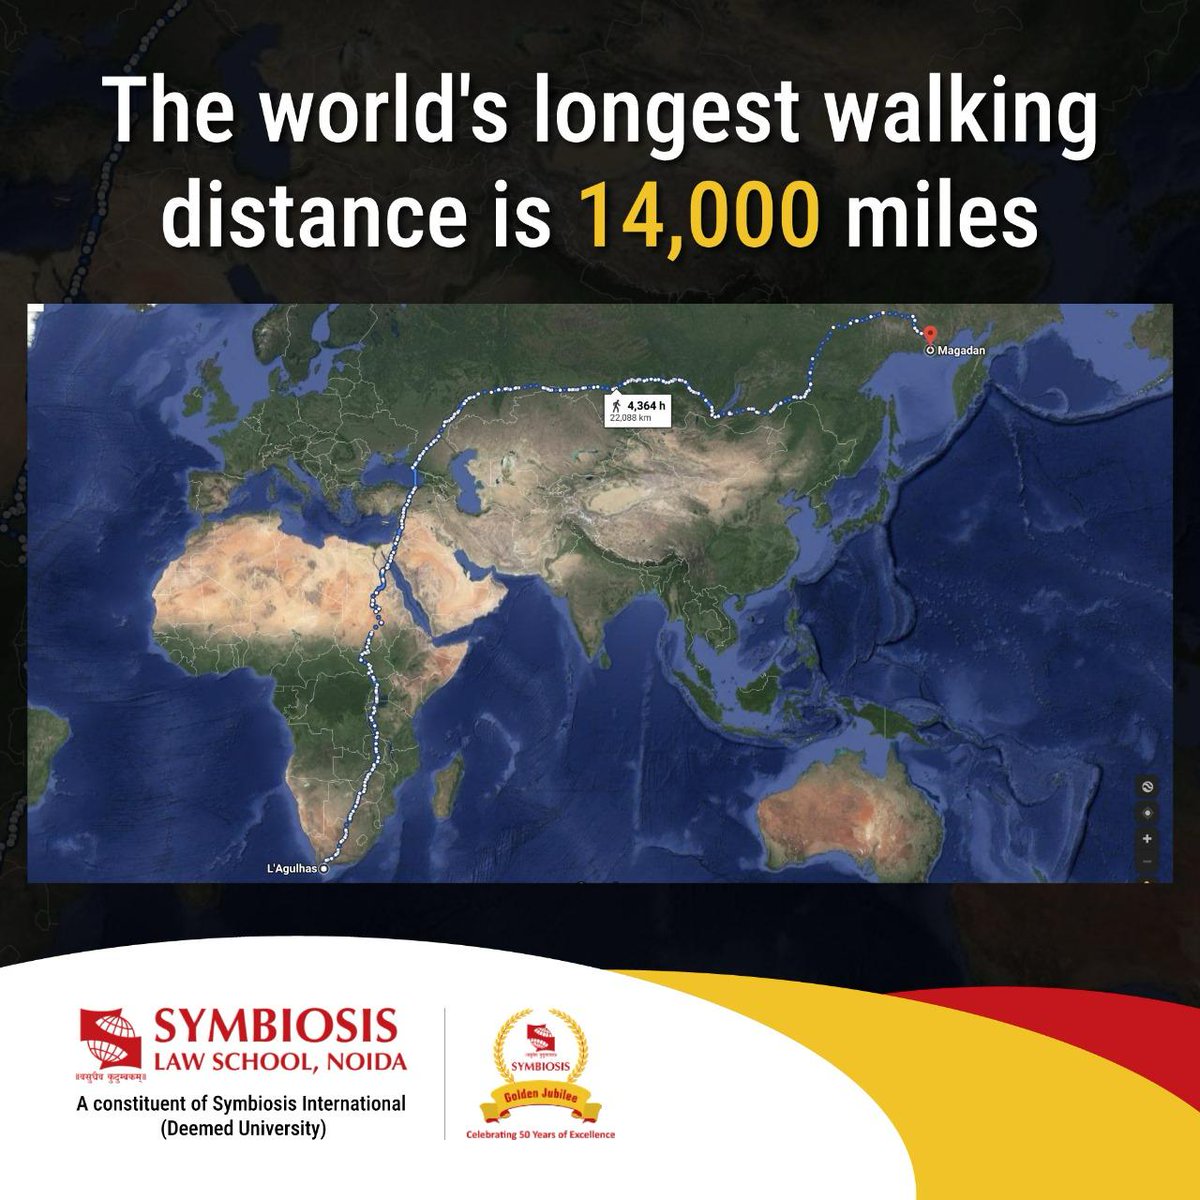 Imagine traversing the globe on foot! 🌍 The ultimate adventure stretches 14,000 miles from Magadan, Russia, to Cape Town, South Africa, without the need for flying or sailing – just bridges and open roads. . . . #symbiosislawschool #noida #longestwalk #Russia #SouthAfrica